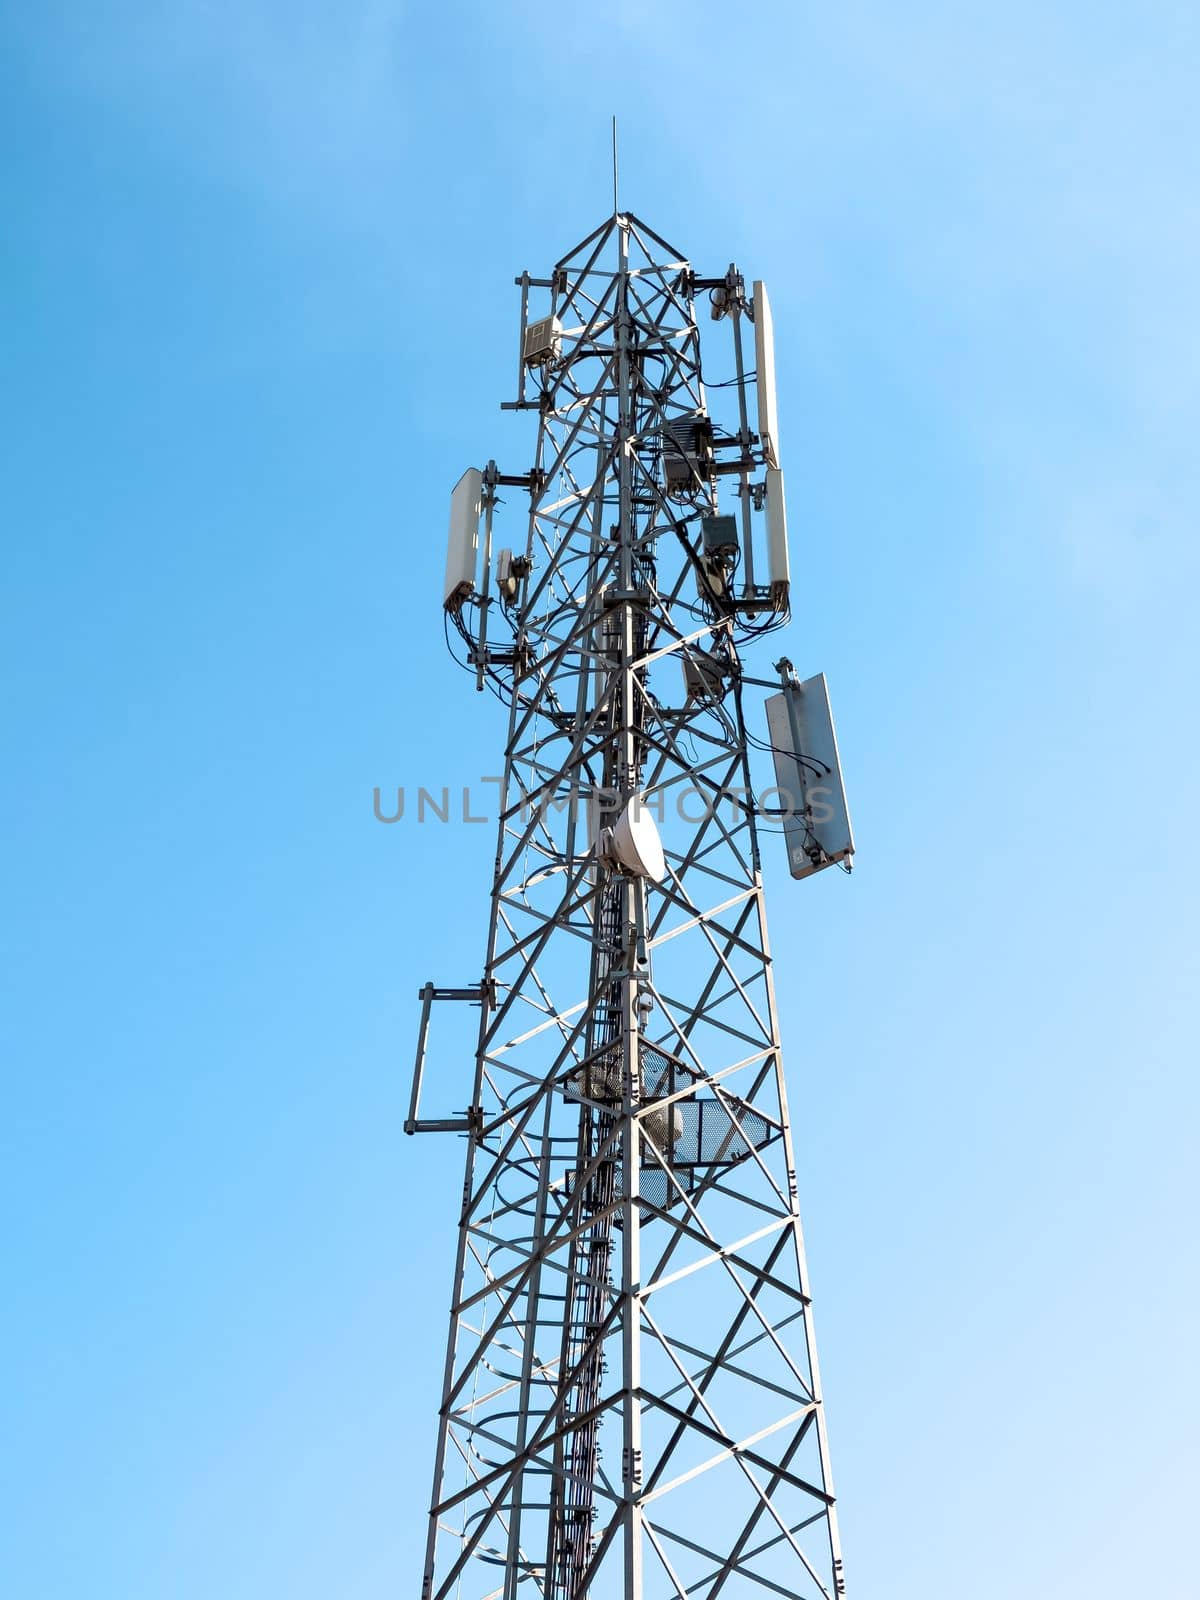 Telecommunication signal tower emitting telephone and television signals on a sunny day